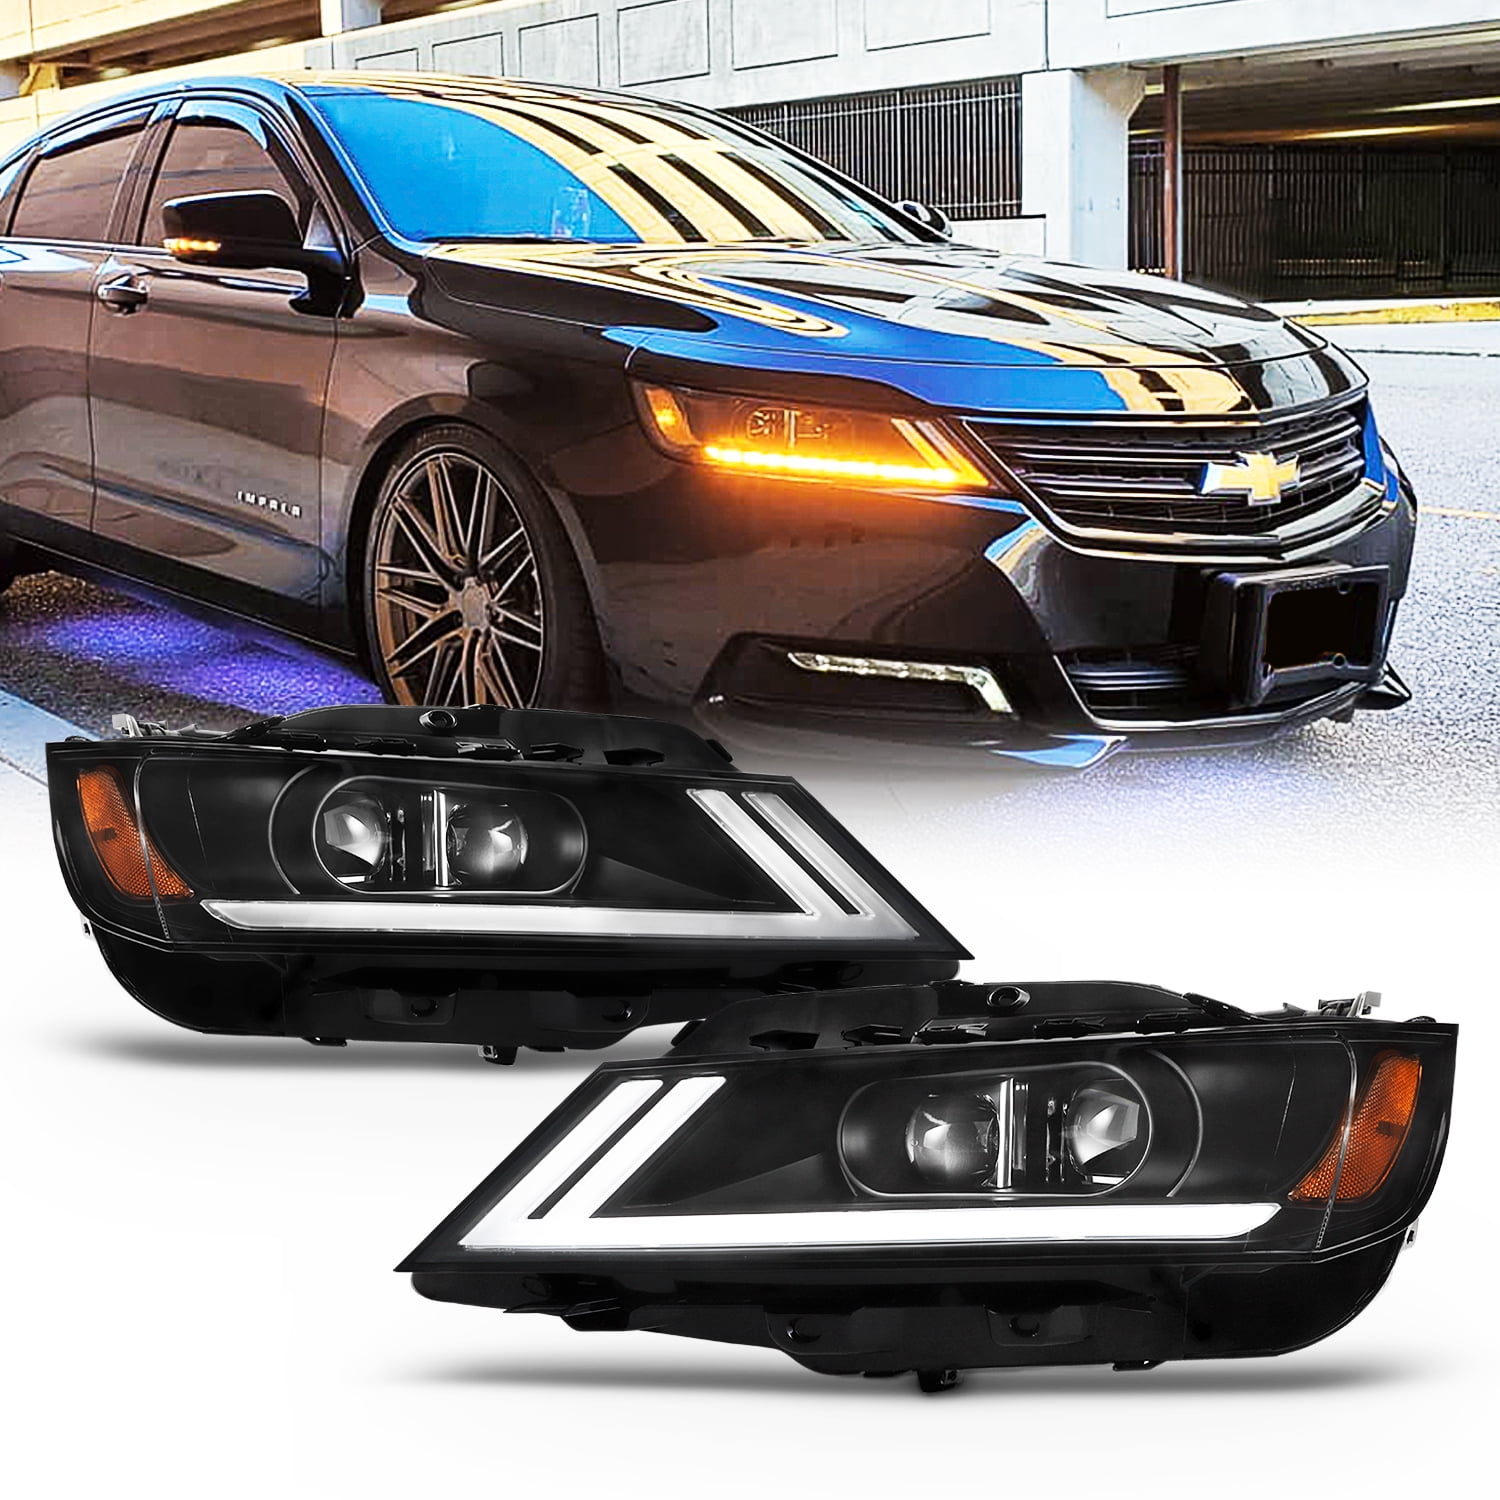 LED DRL SWITCHBACK] For 2014-2020 Chevy Impala Black Projector Headlight  Lamp